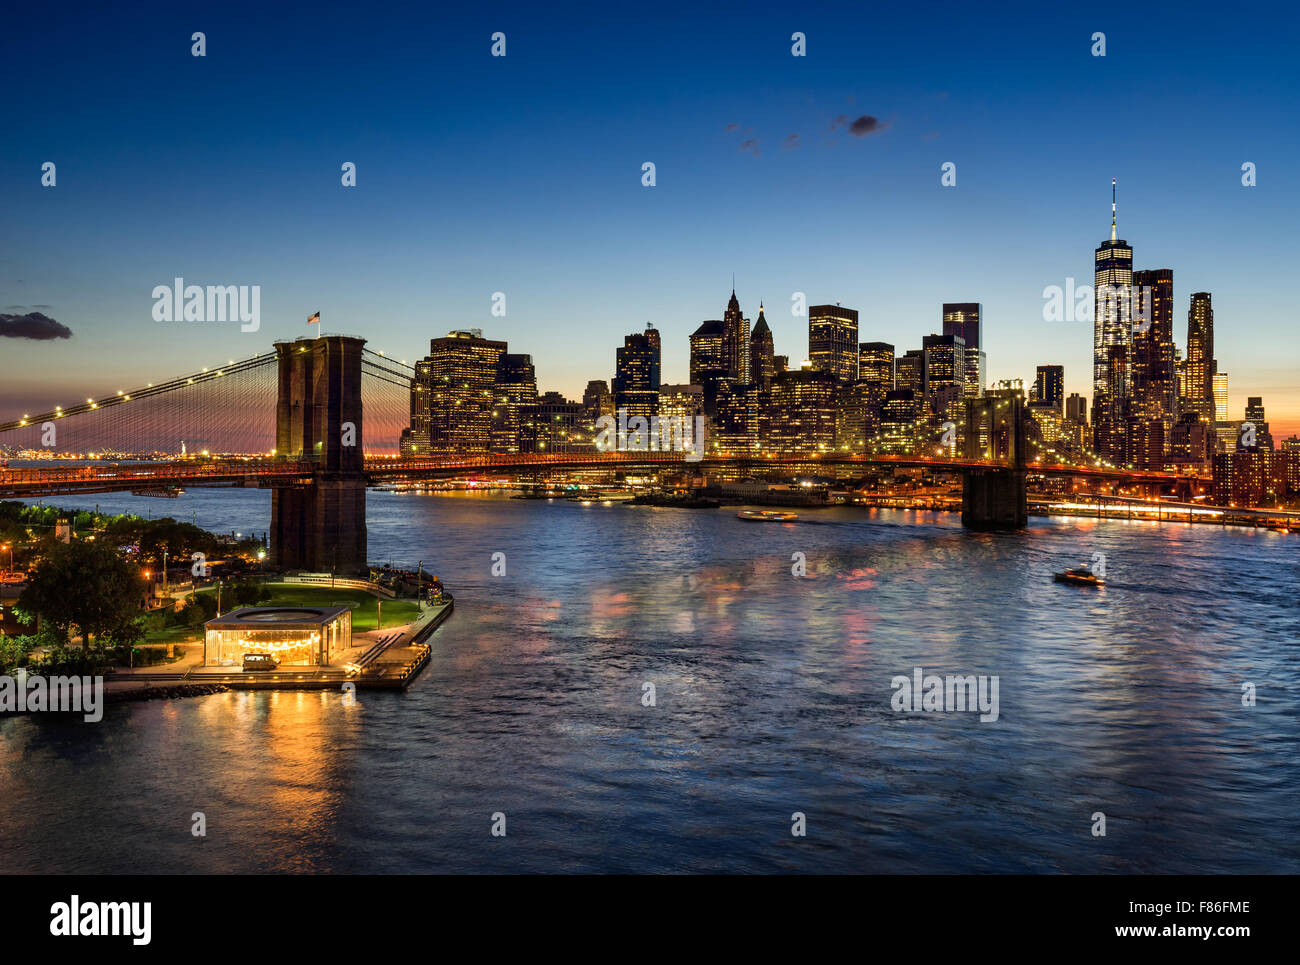 Brooklyn Bridge and illuminated Lower Manhattan at twilight. Financial District skyscrapers reflect in the East River, New York. Stock Photo